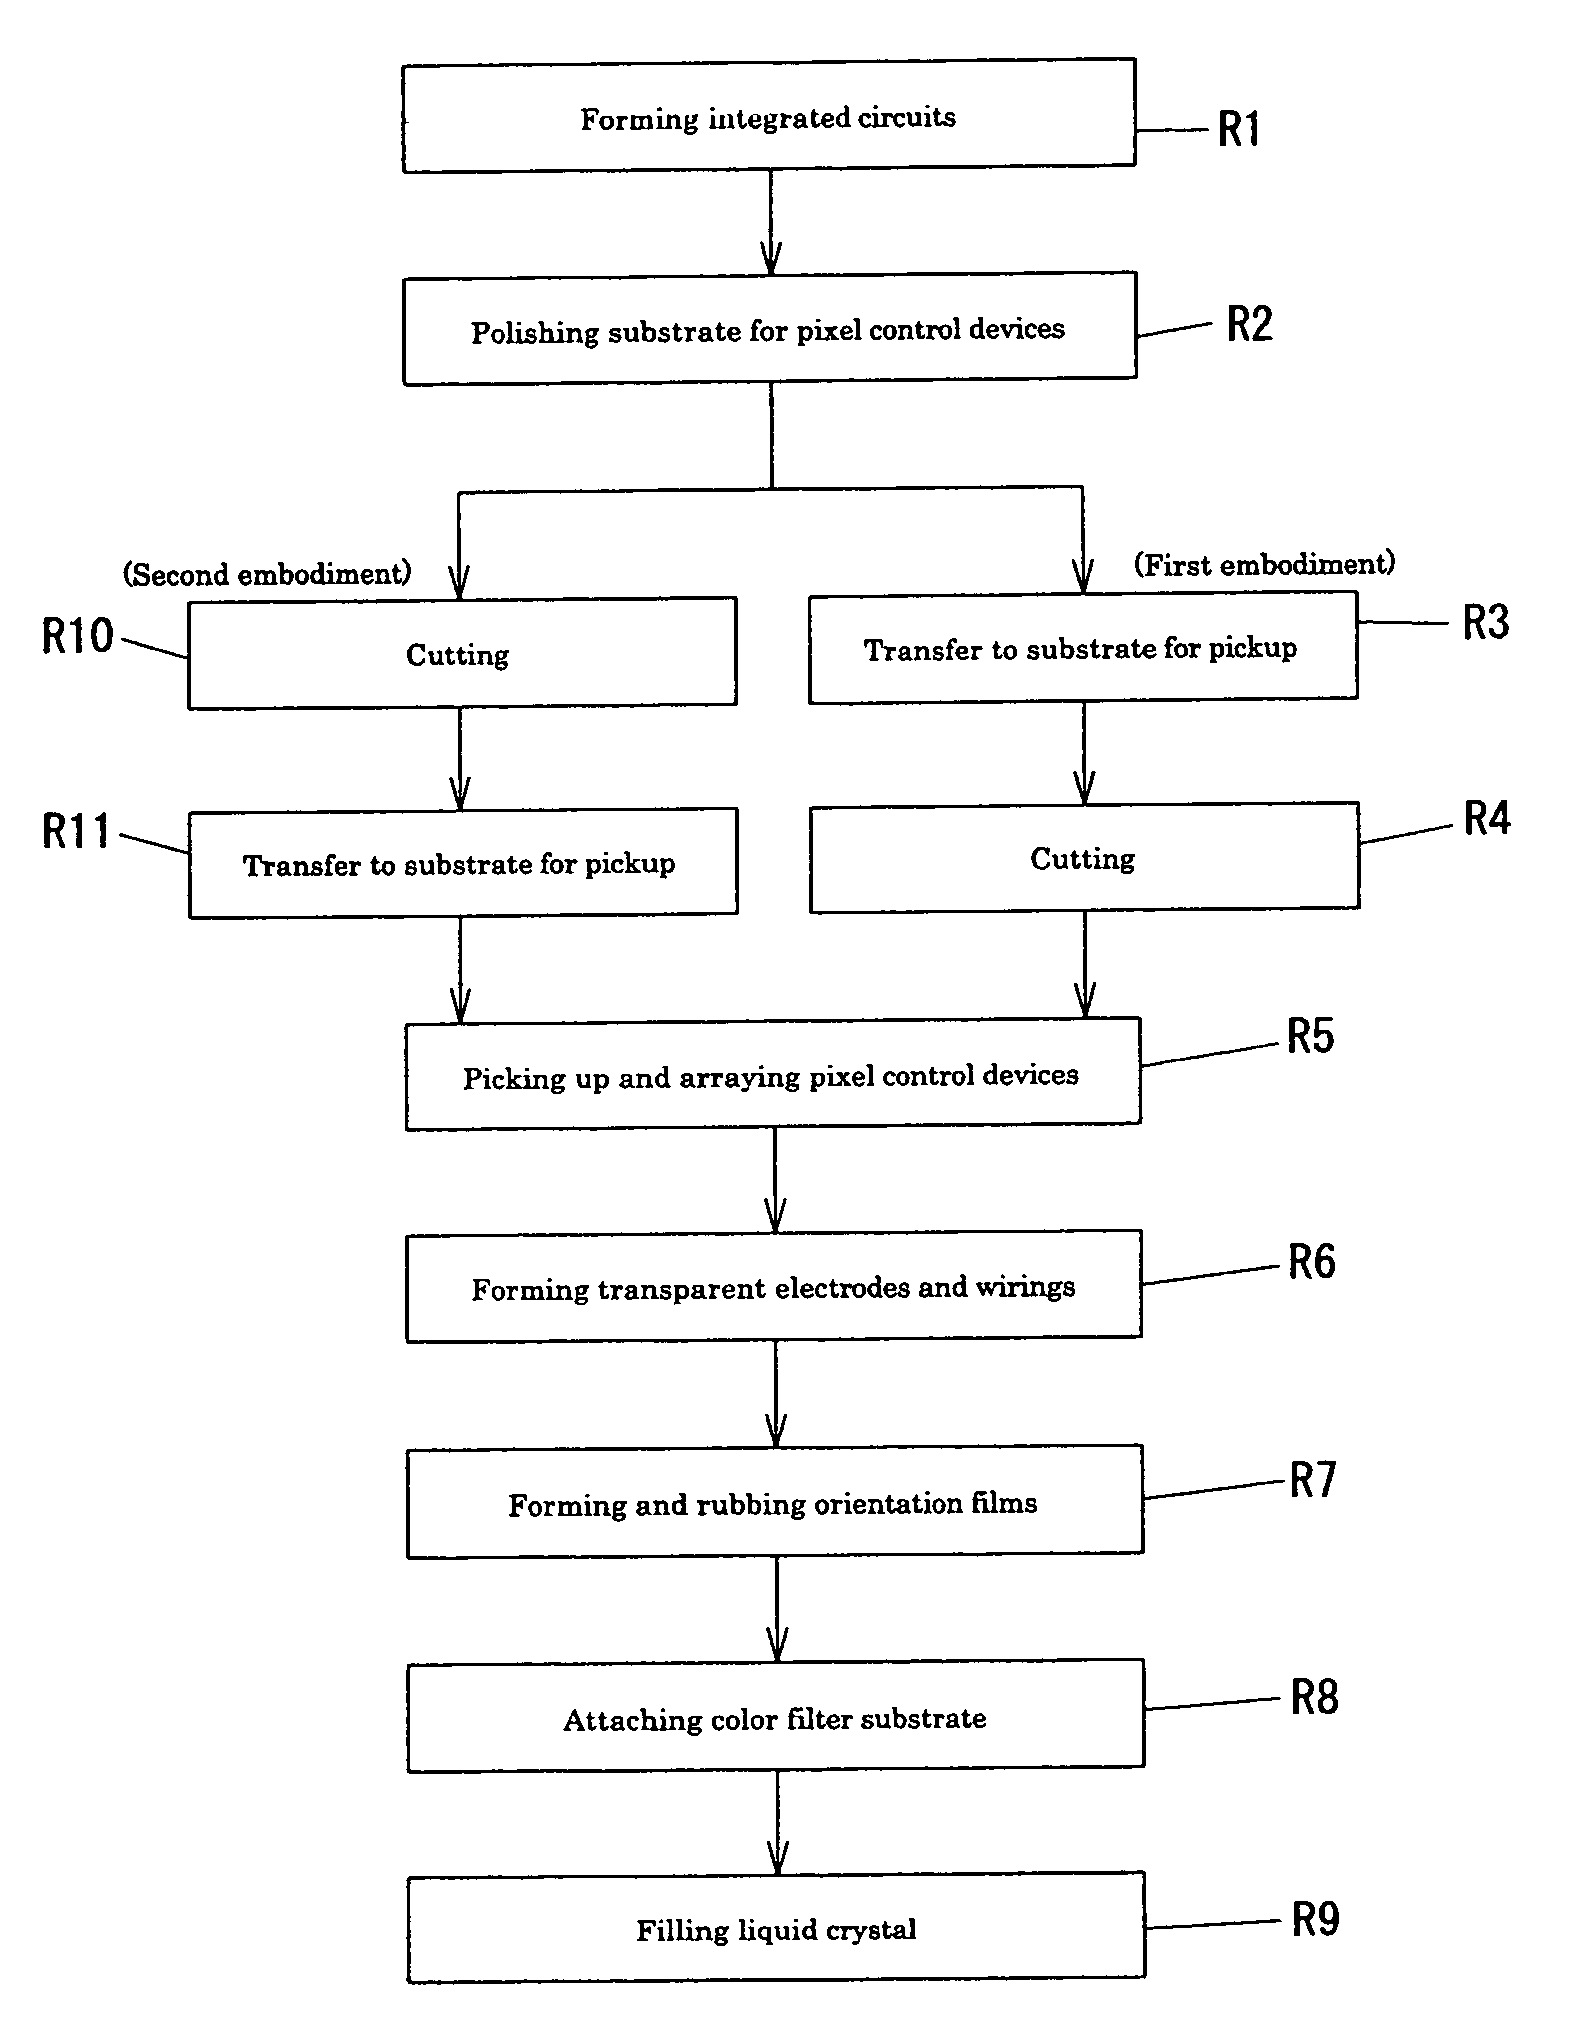 Pixel control element selection transfer method, pixel control device mounting device used for pixel control element selection transfer method, wiring formation method after pixel control element transfer, and planar display substrate